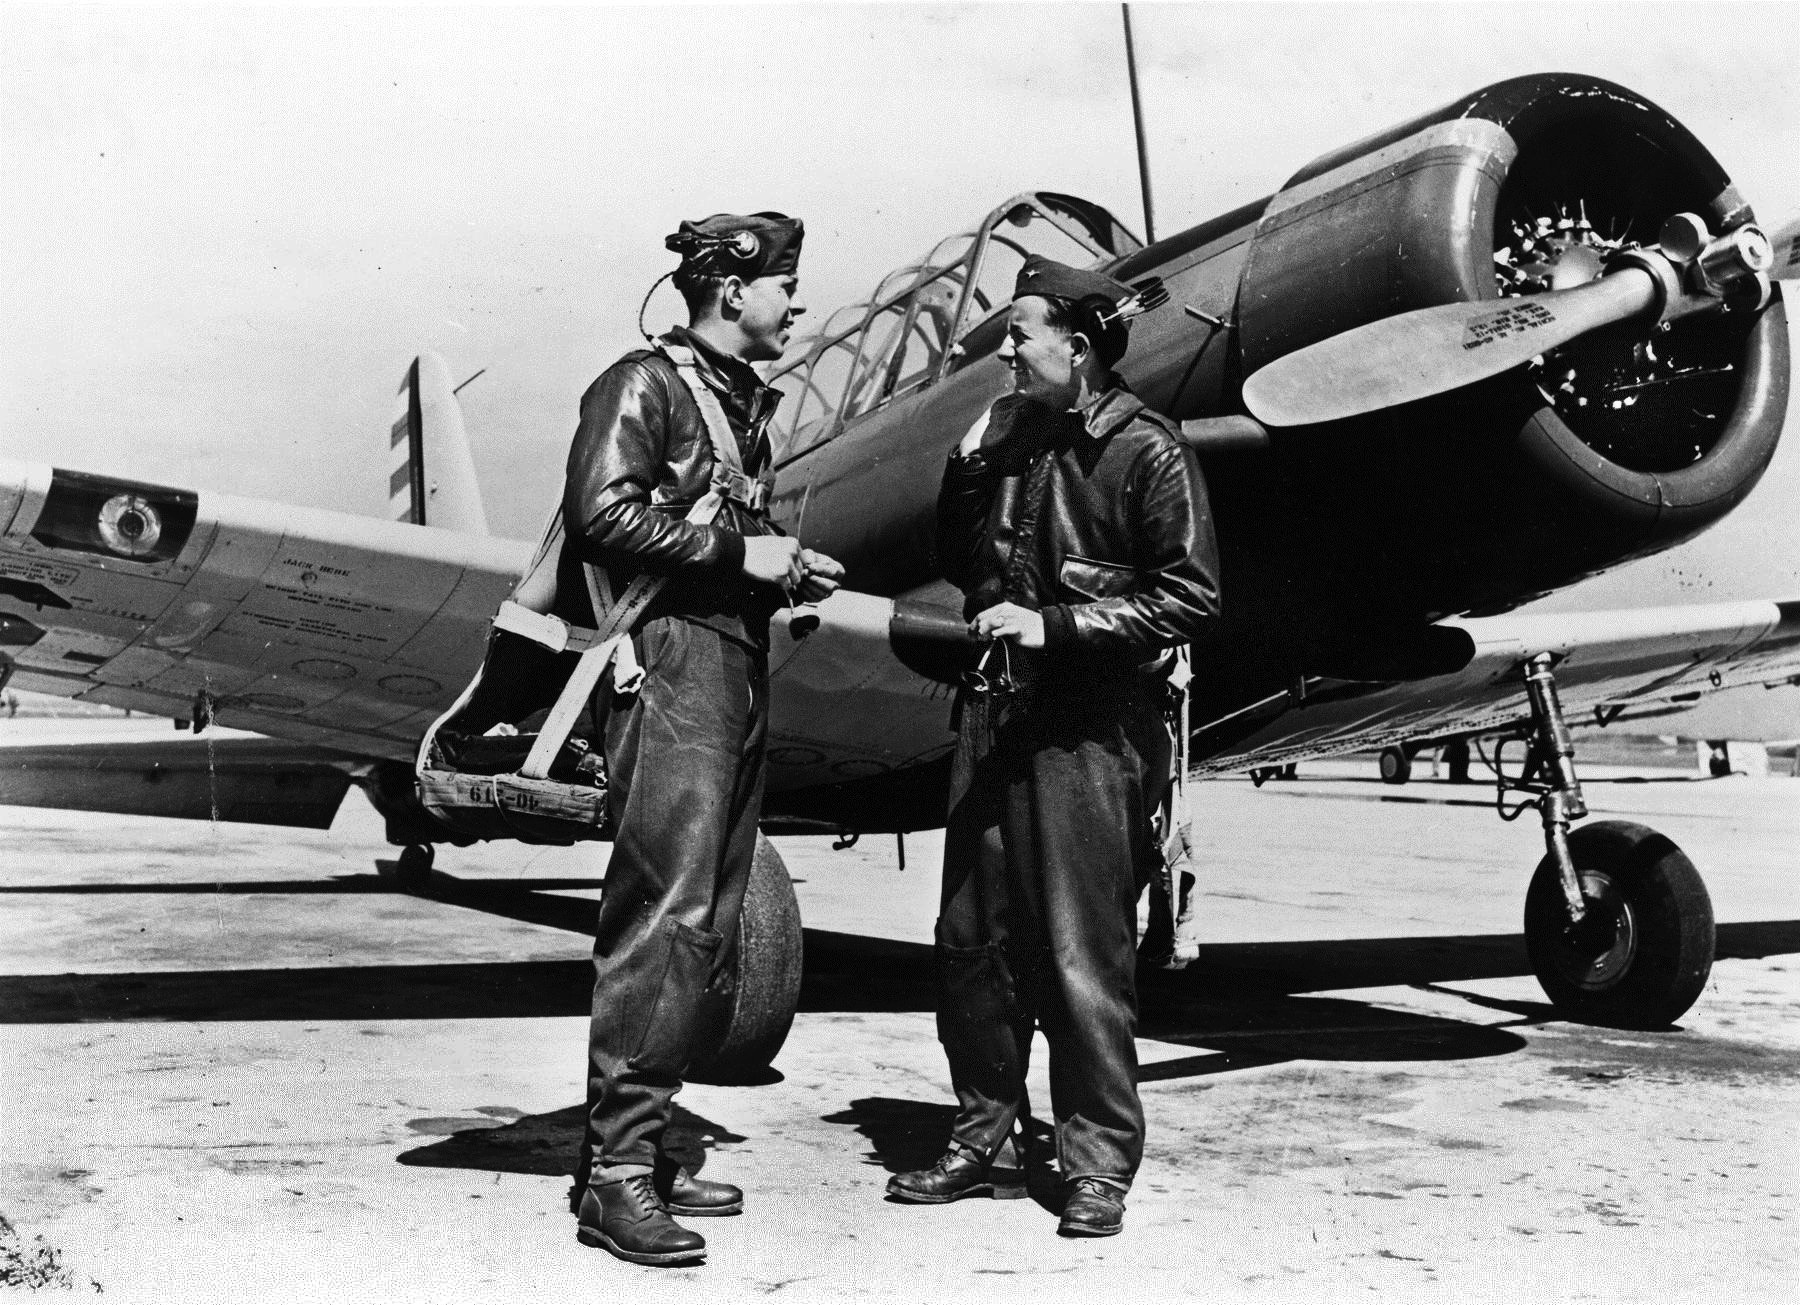 With their BT-13 basic trainer aircraft in the background, a pair of flight students in the enlisted pilot training program confer following a flight.